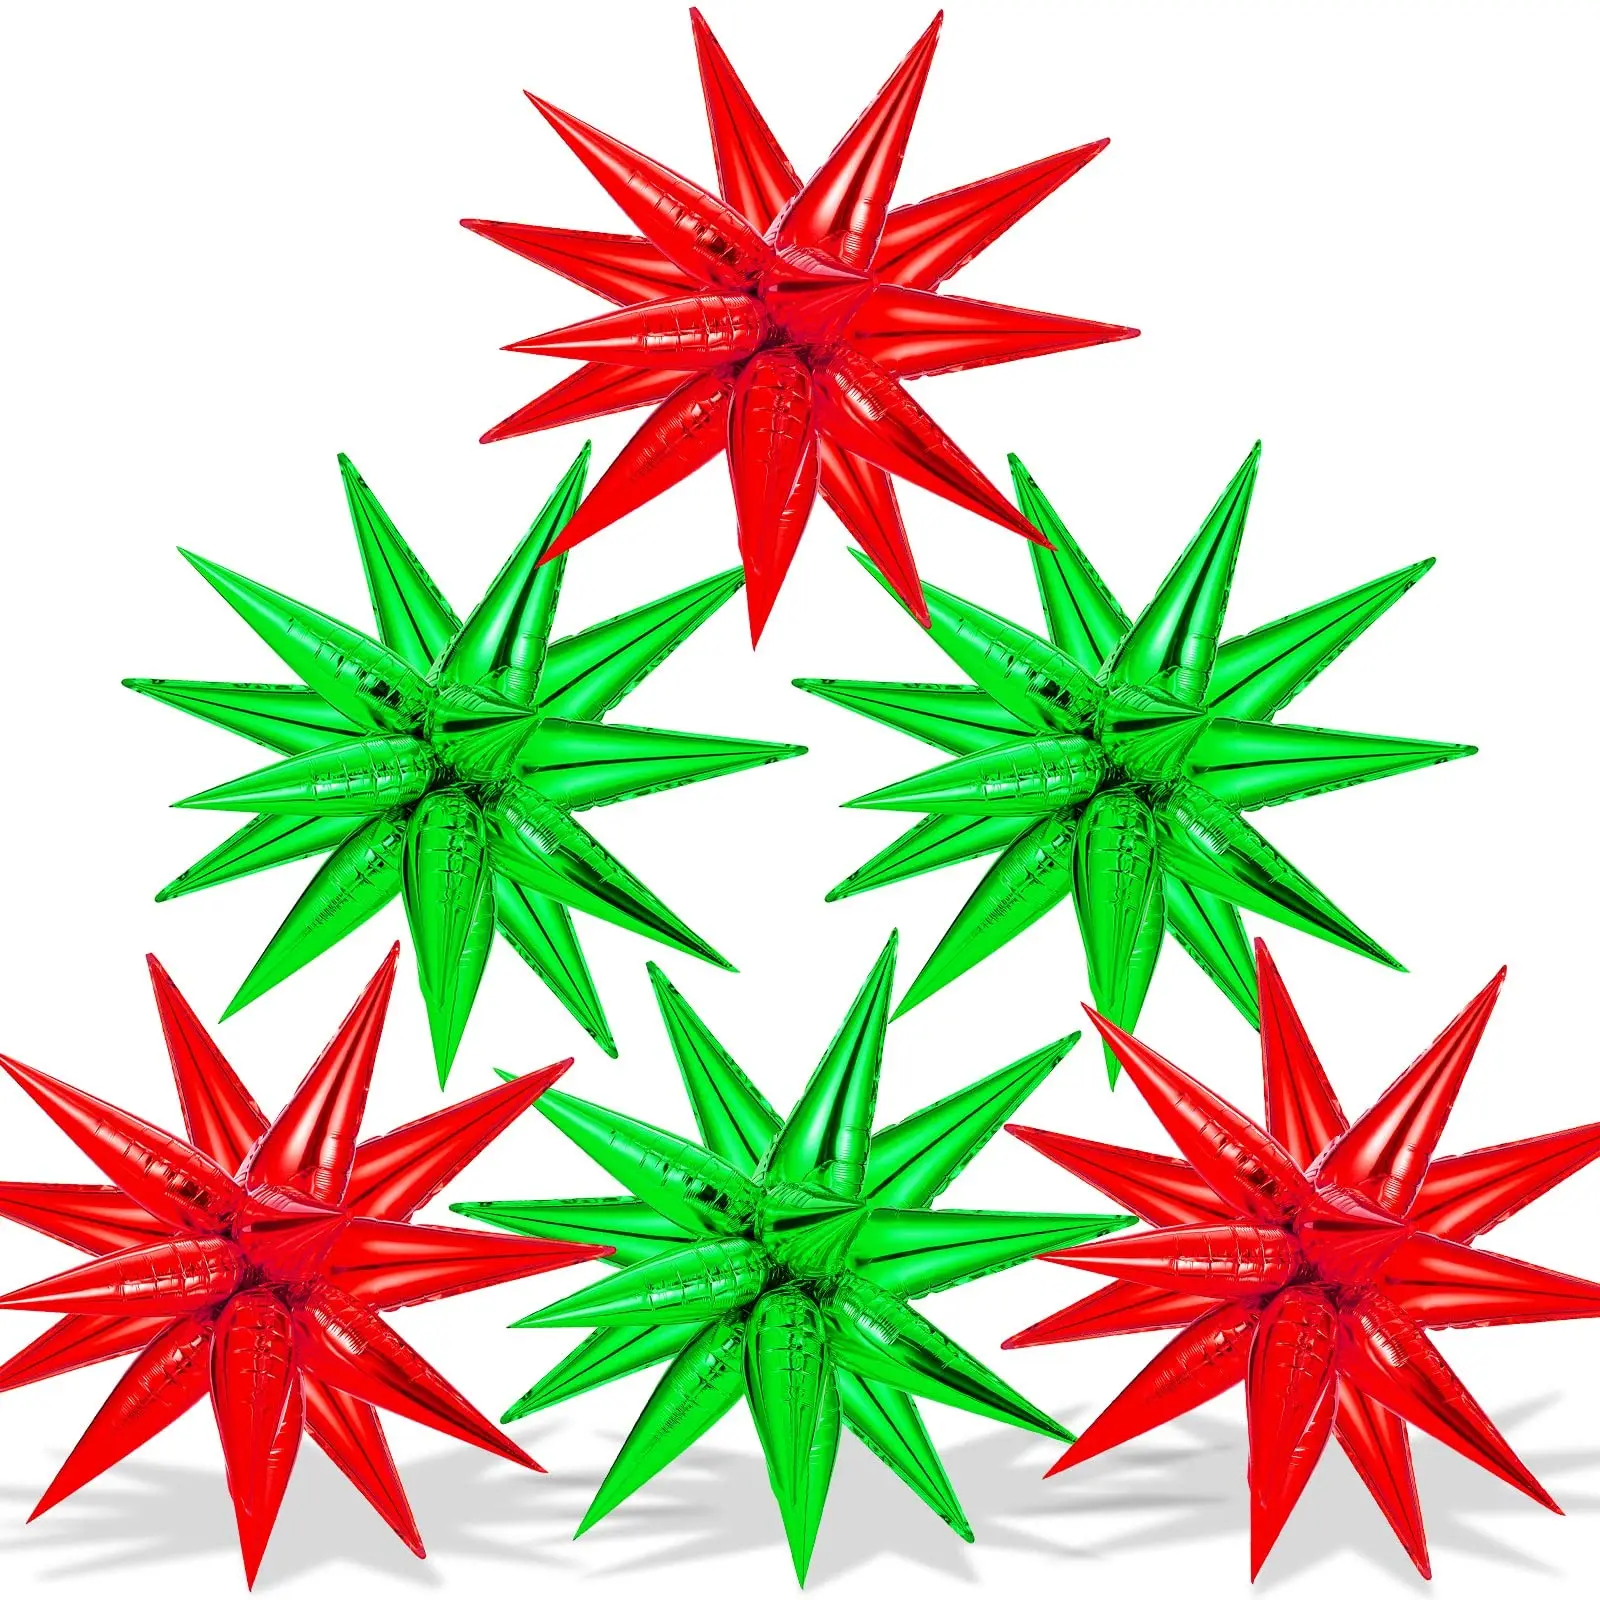 

72Pcs Star Balloons Explosion Christmas Star Cone Balloons Red and Green Foil Mylar Spike Balloons Birthday Party Supplies Decor